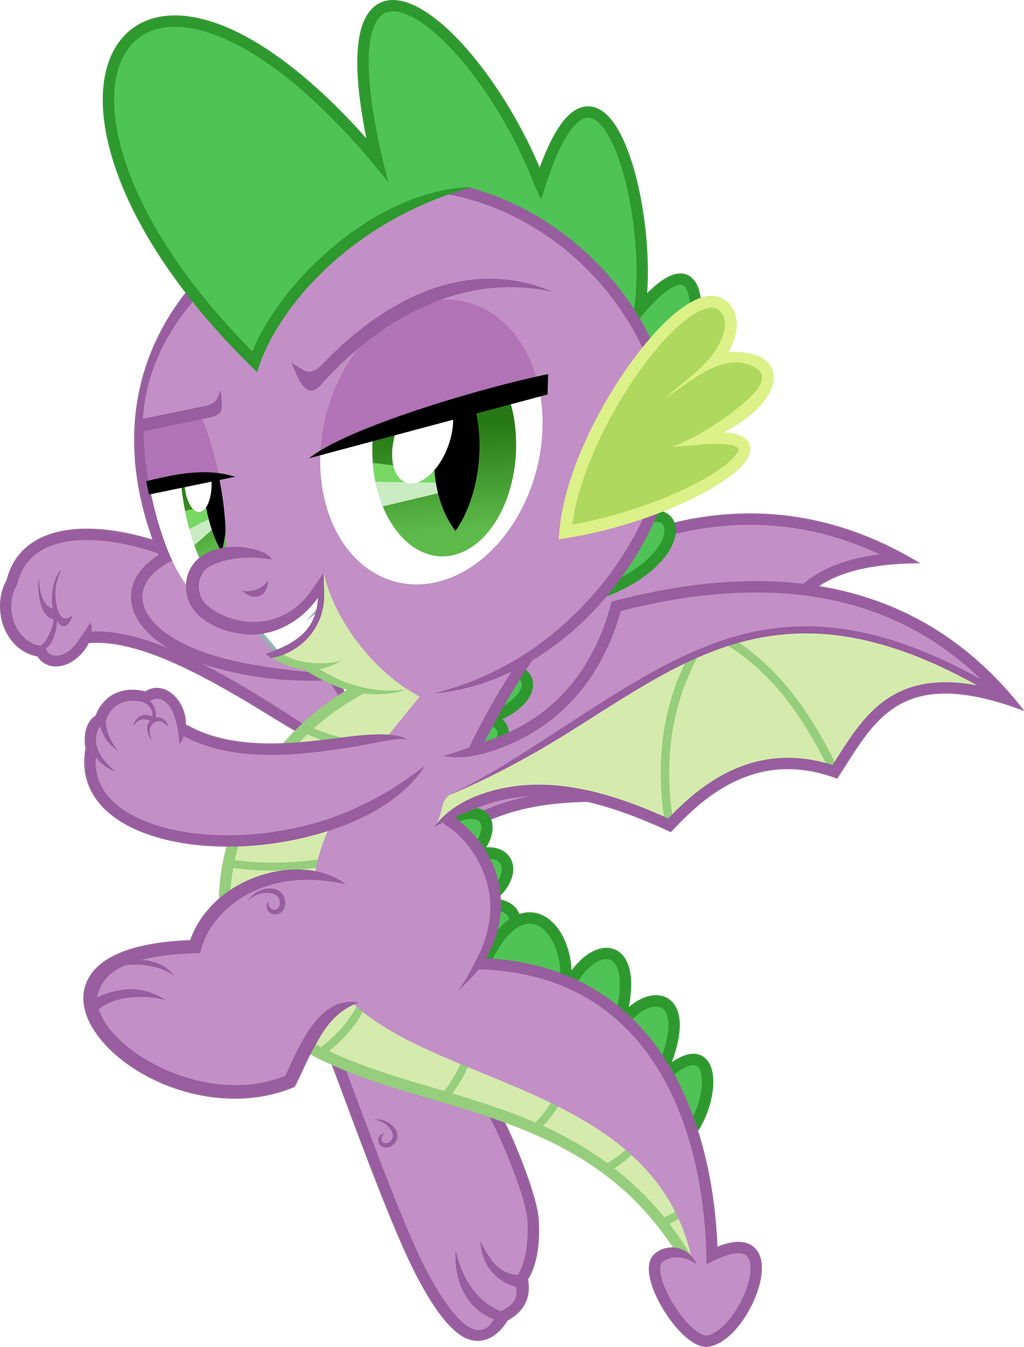 How old is spike from my little pony